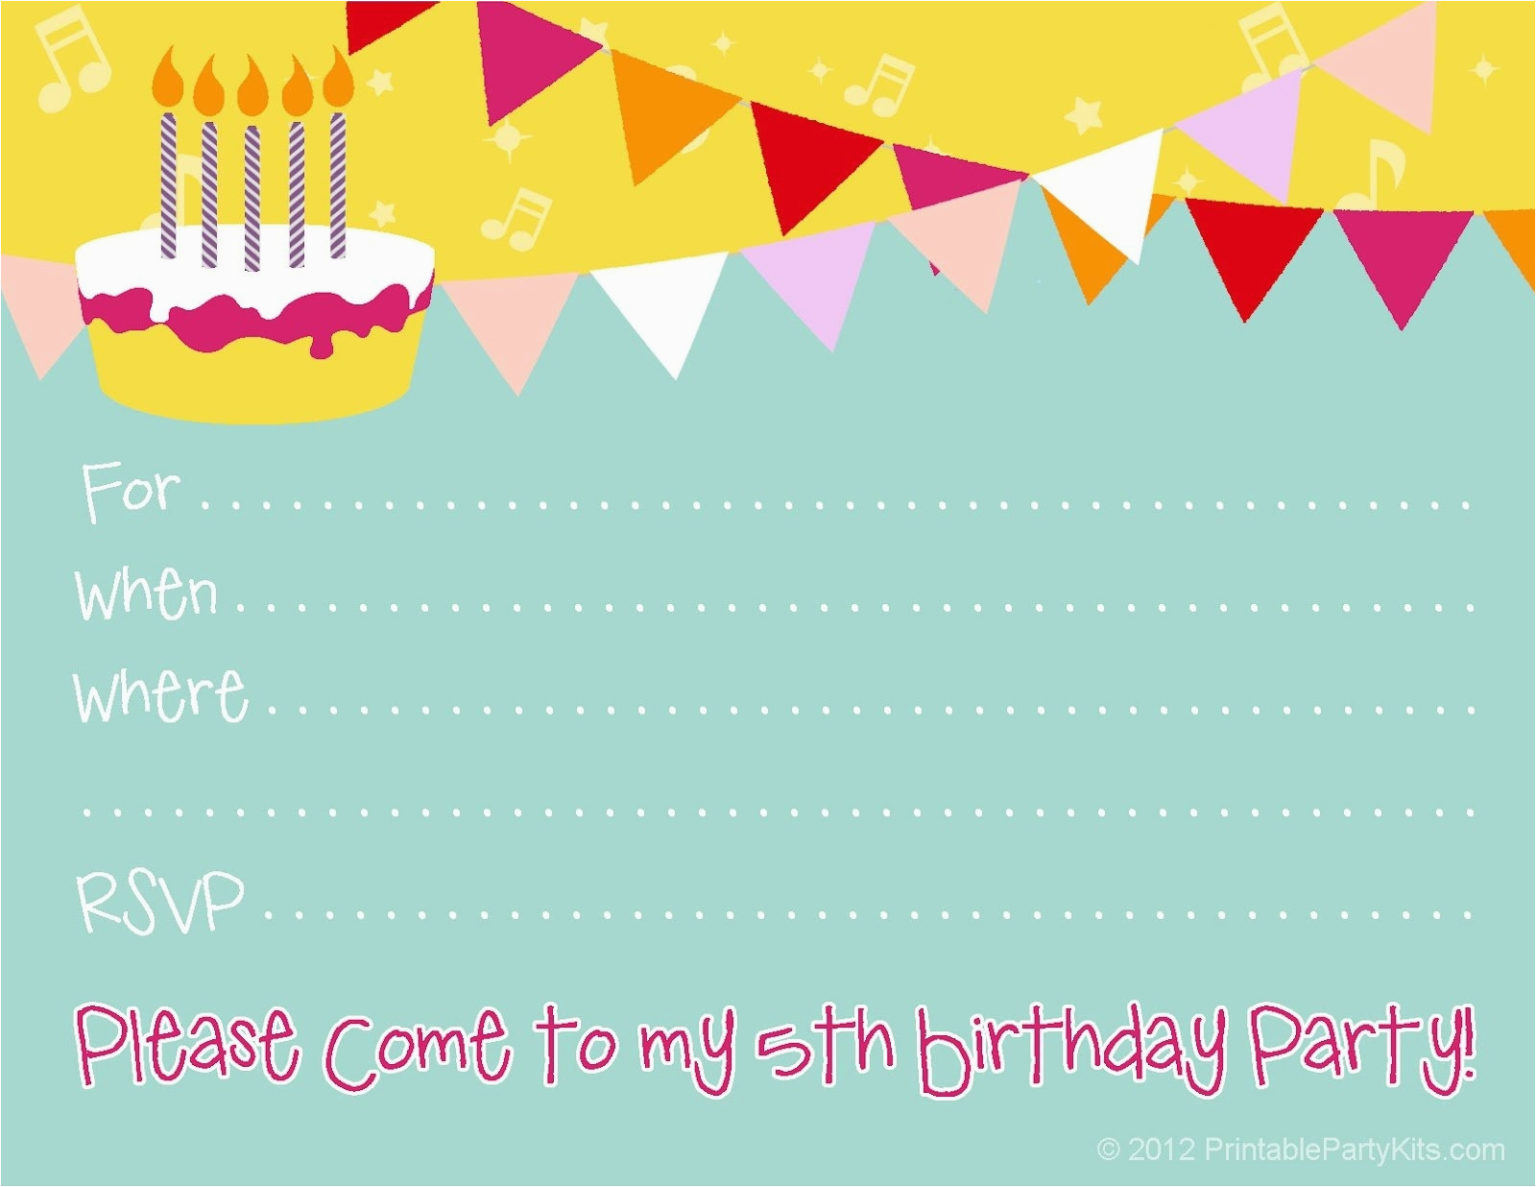 create-your-own-birthday-card-online-free-printable-make